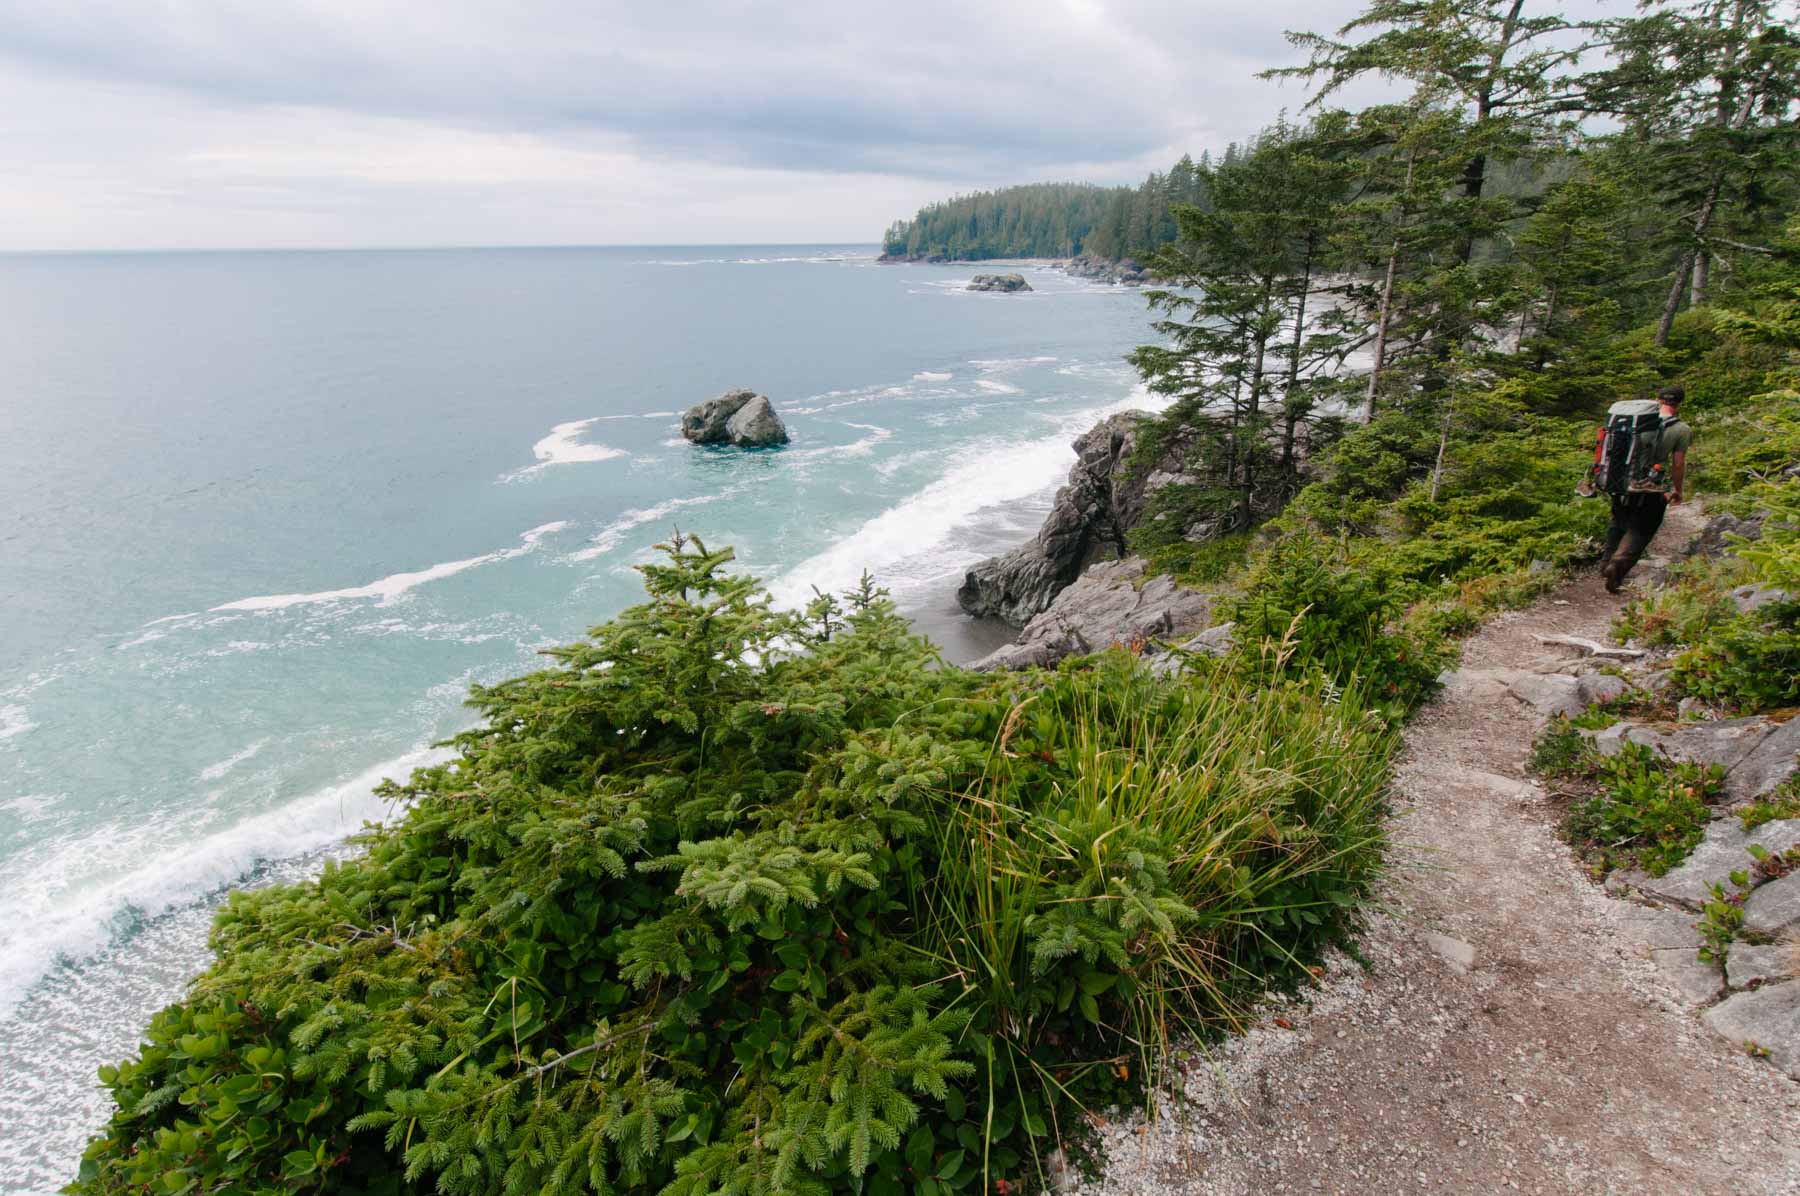 Hiking above the thundering coast of Vancouver Island